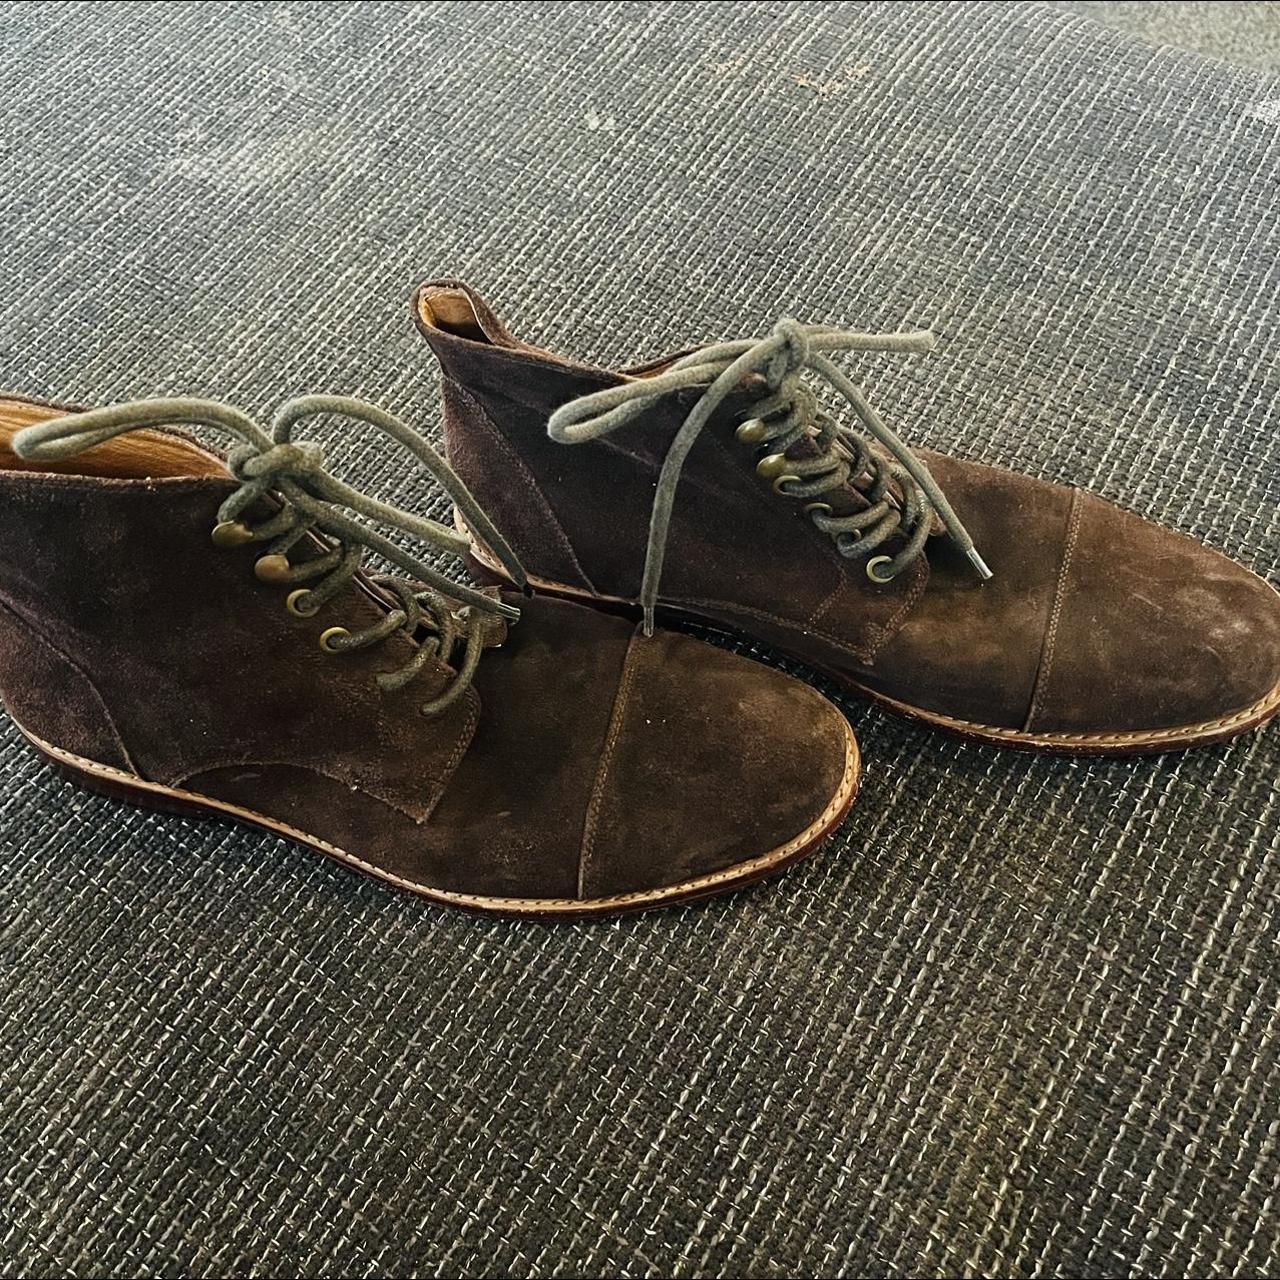 Amsterdam Shoe Co. suede leather boots in dark brown... - Depop